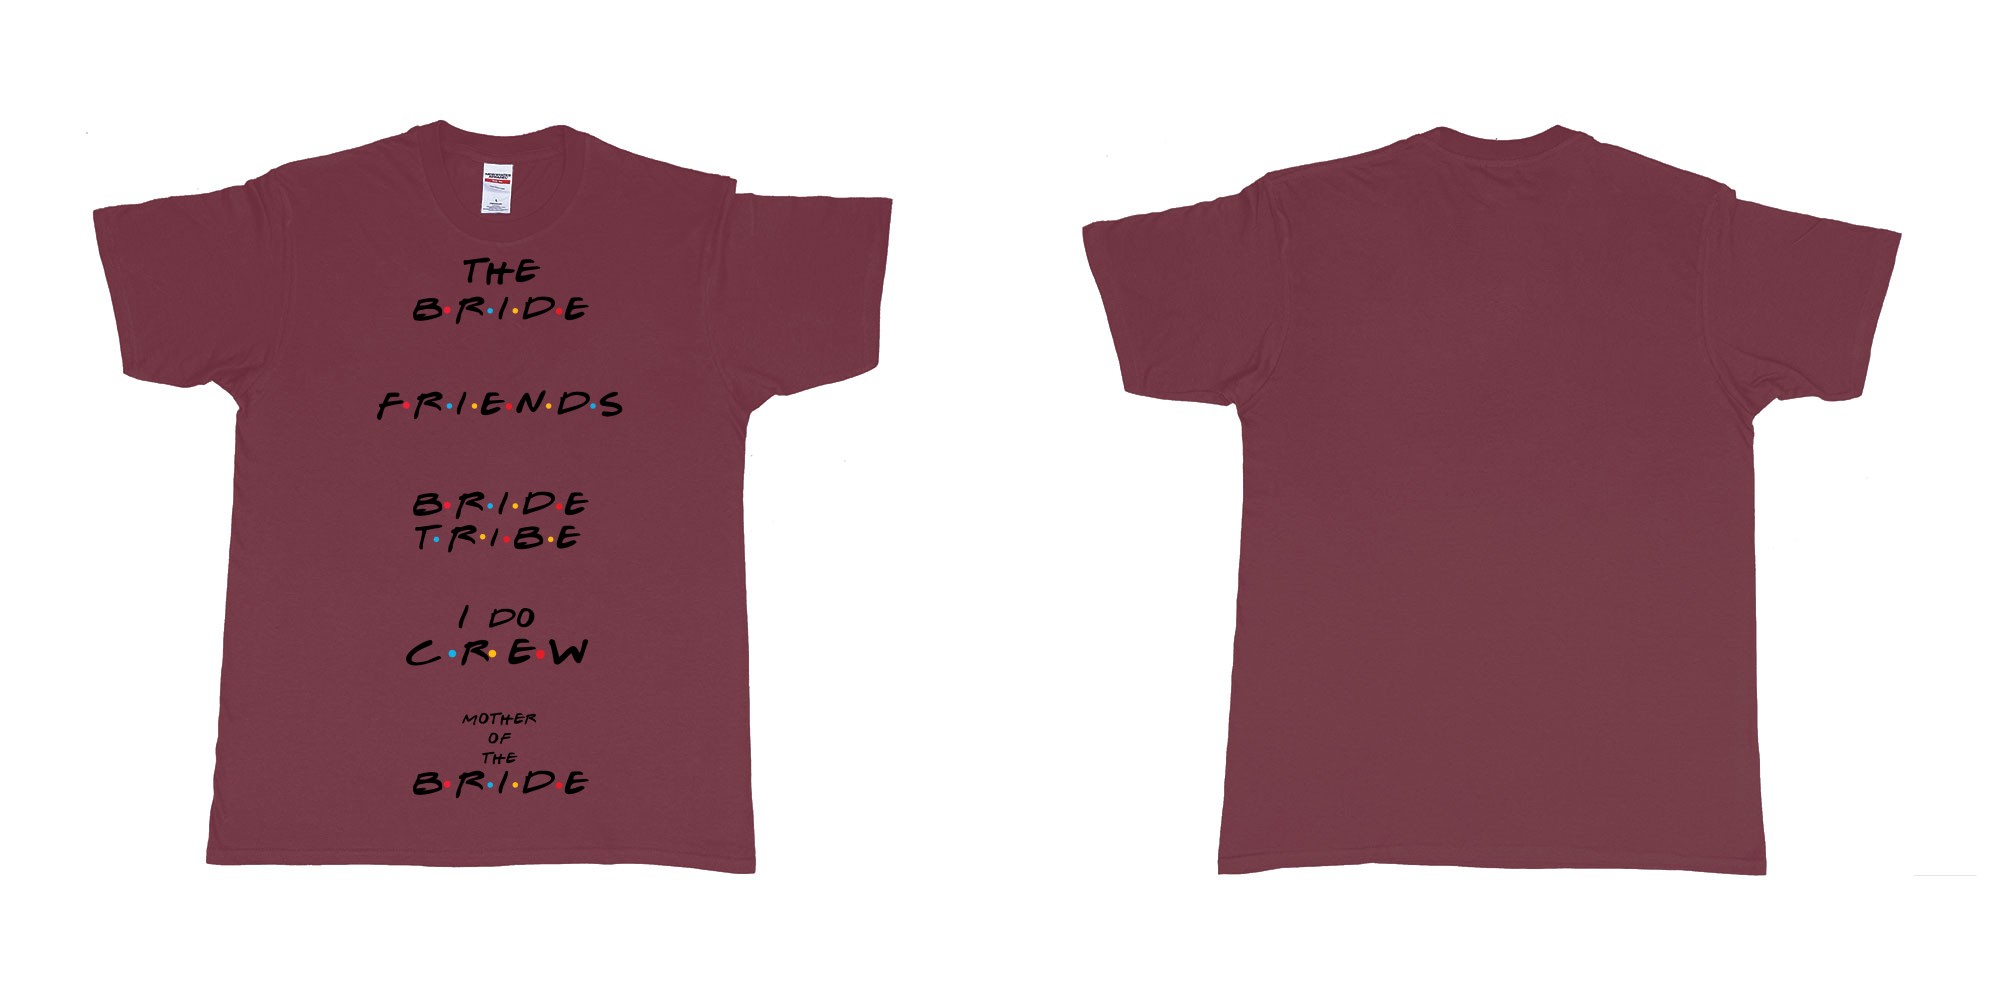 Custom tshirt design TPW friends in fabric color marron choice your own text made in Bali by The Pirate Way